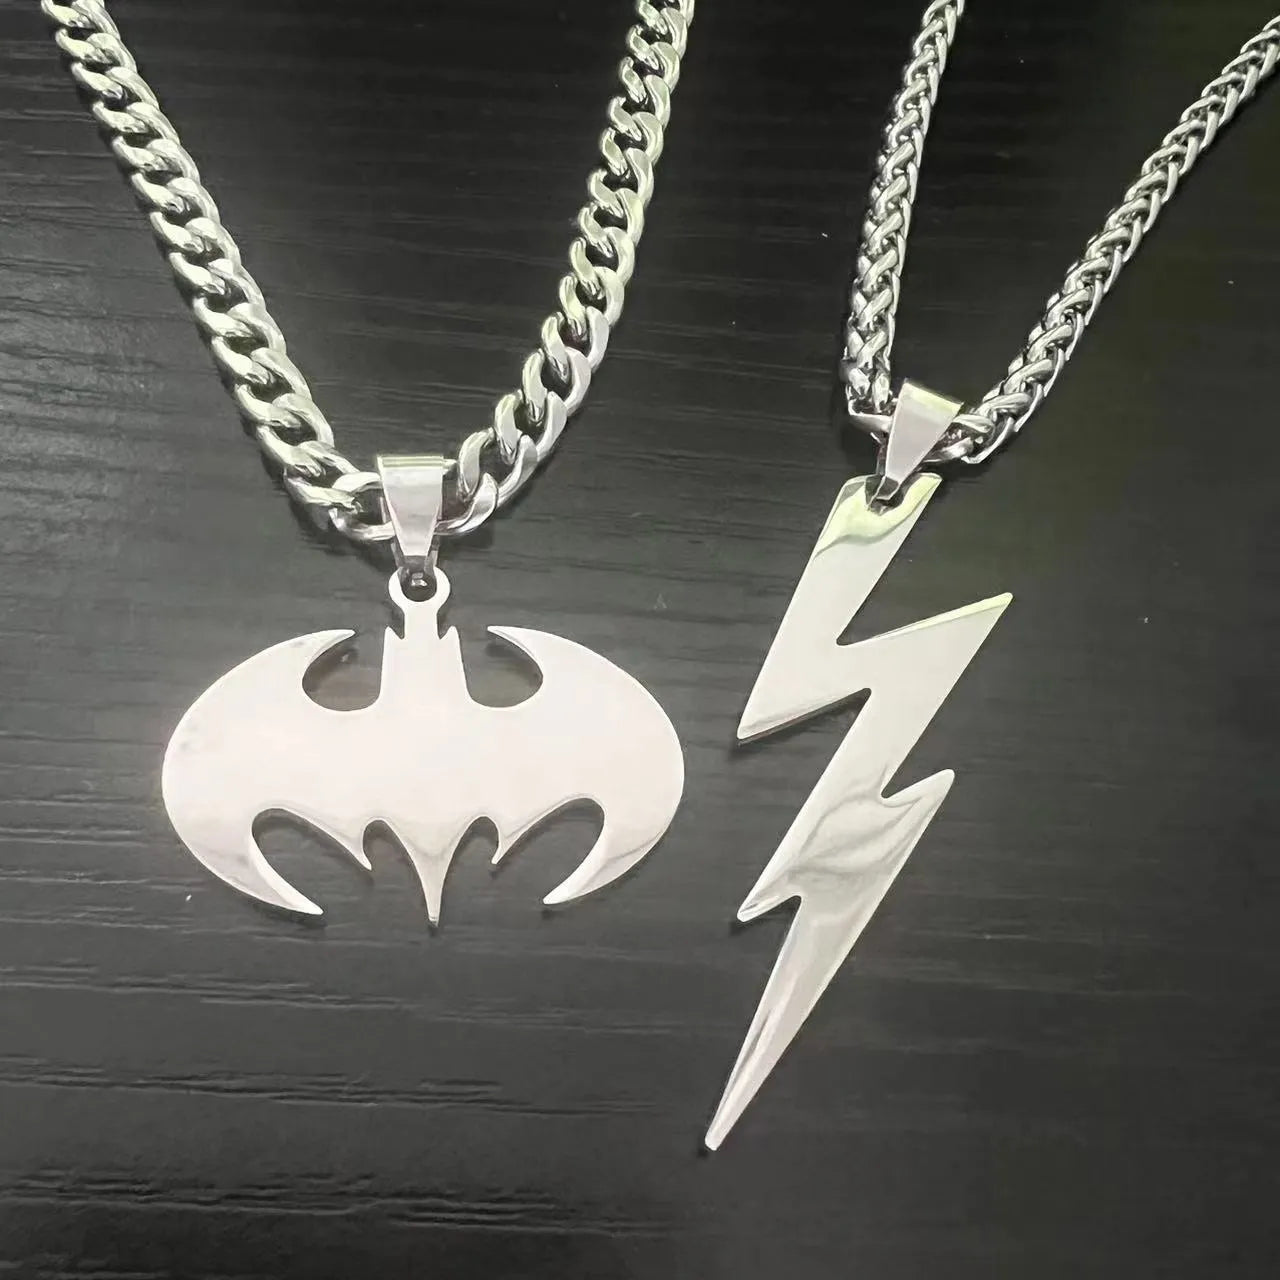 Unleash Your Inner Hero  – The Ultimate Jewelry Necklace for Boys!